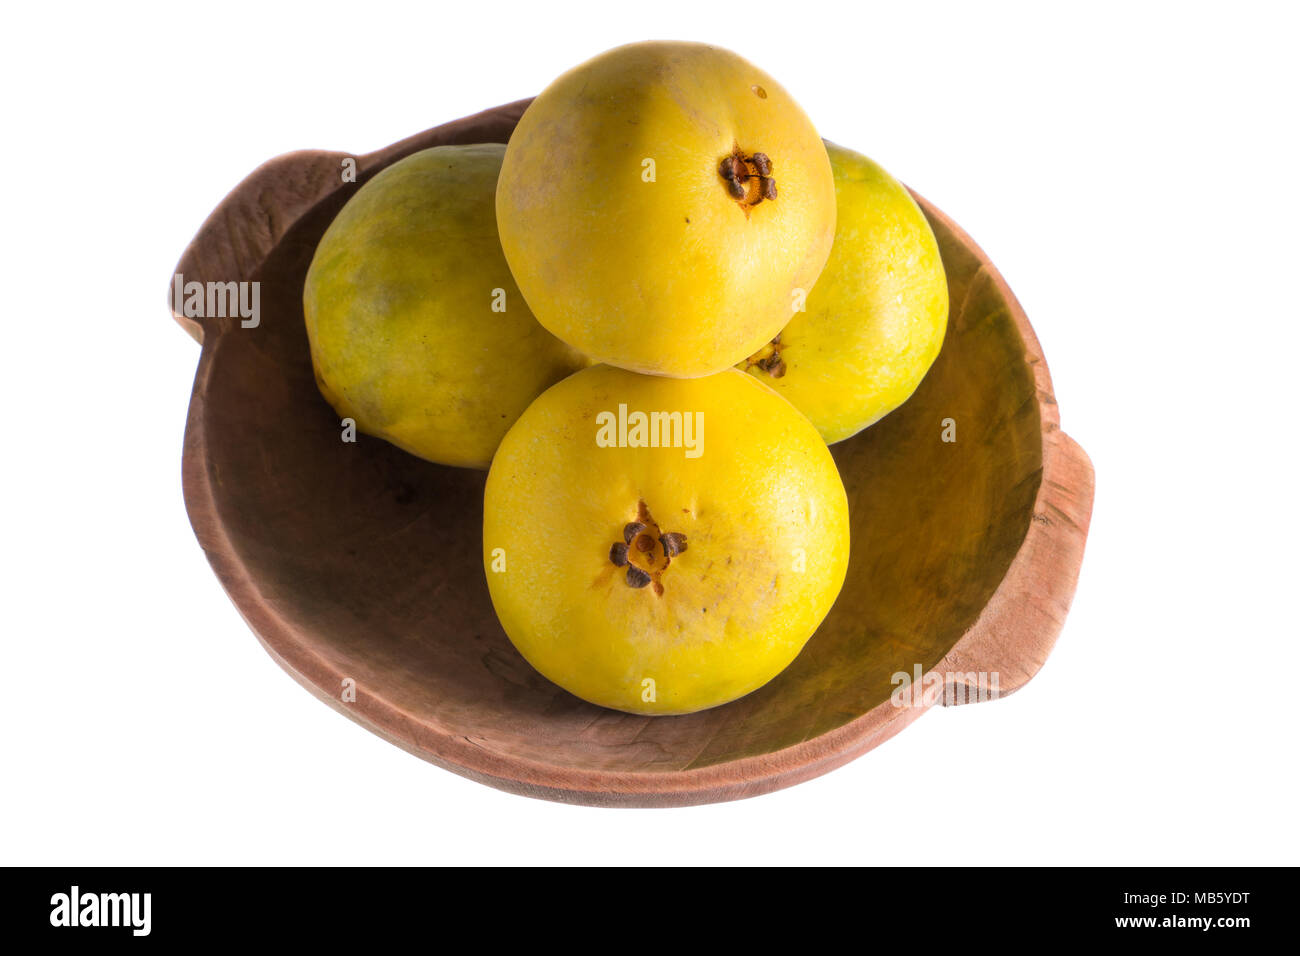 araza fruits in wooden bowl isolated on white from the Amazon area of Ecuador Stock Photo